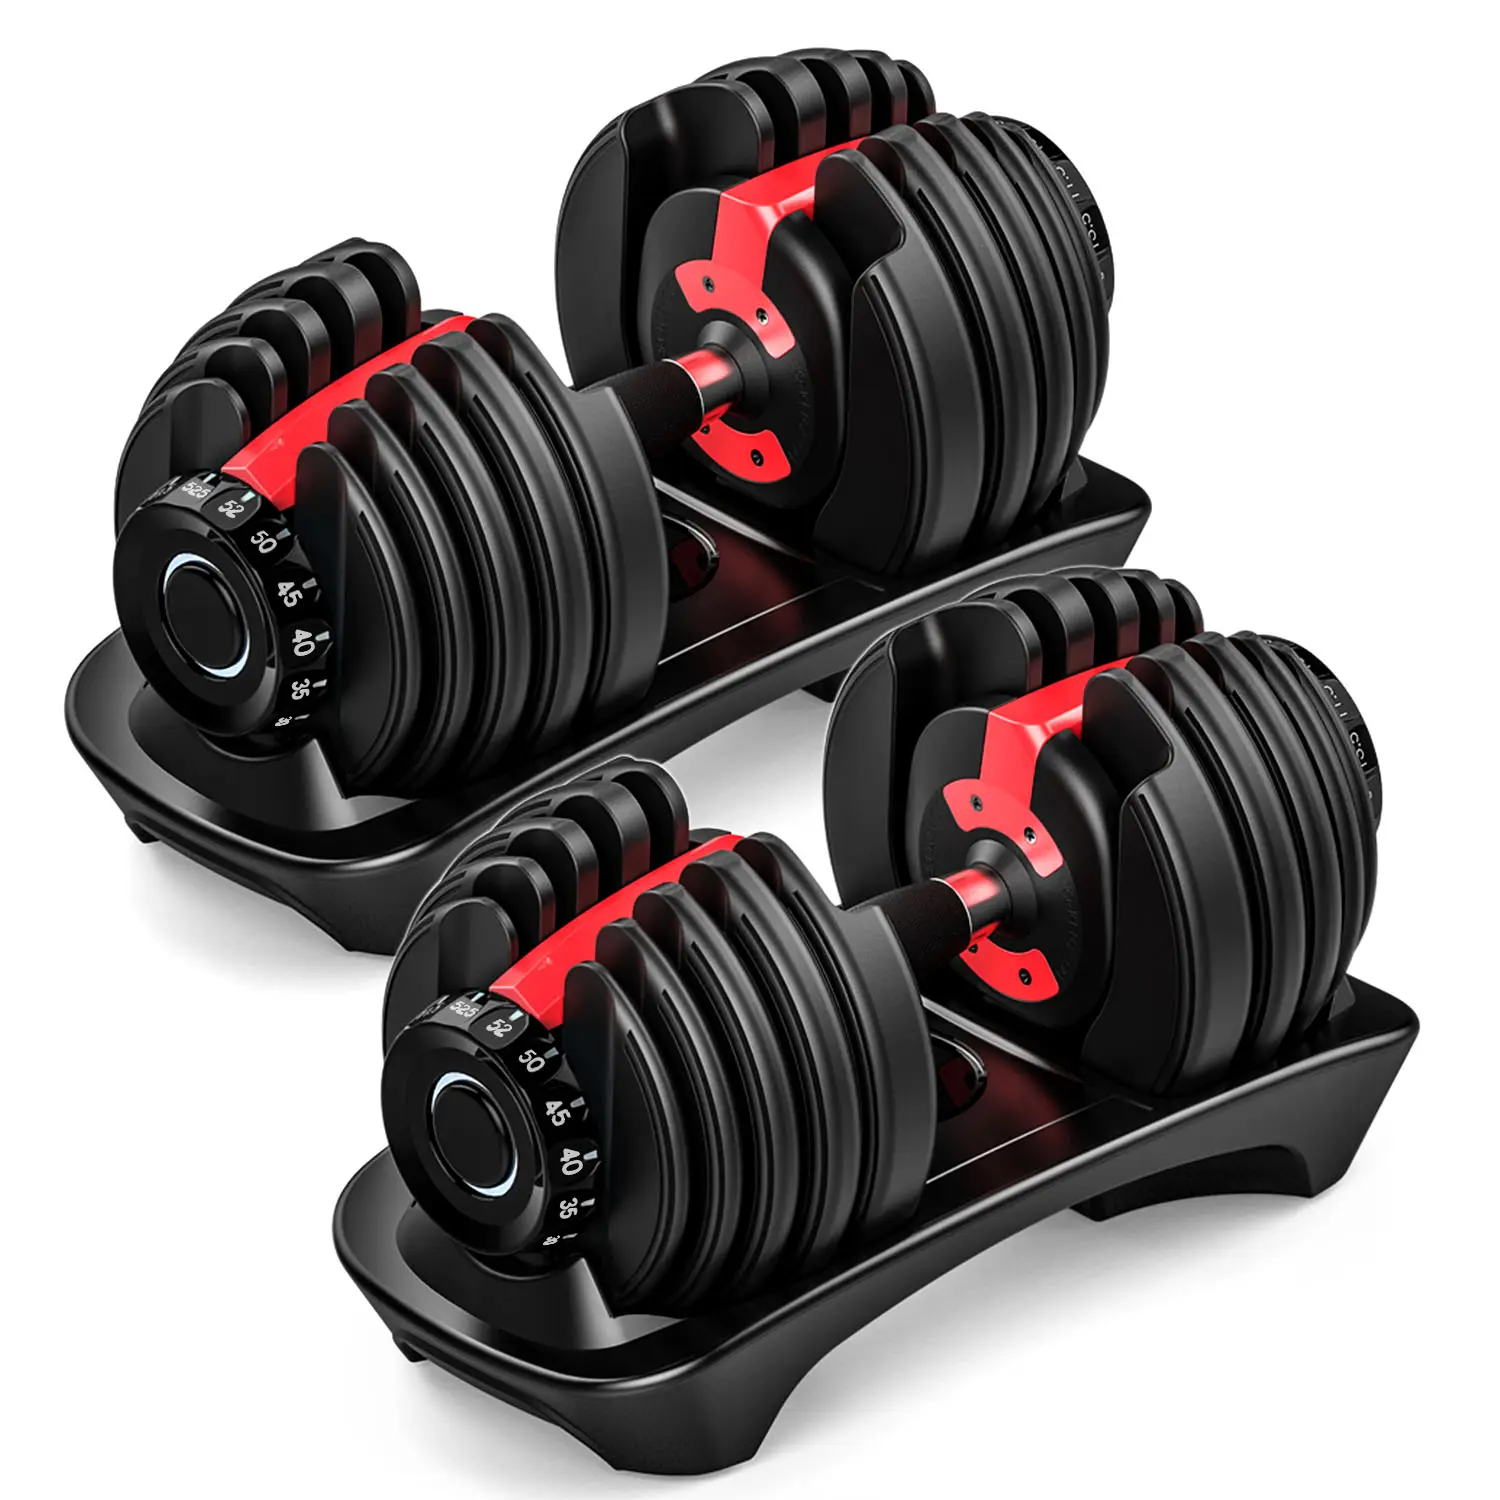 Fast Adjust Weight Dumbbells 5lb-52.5lb Free Weight Training Equipment for Man Women Exercise at Home